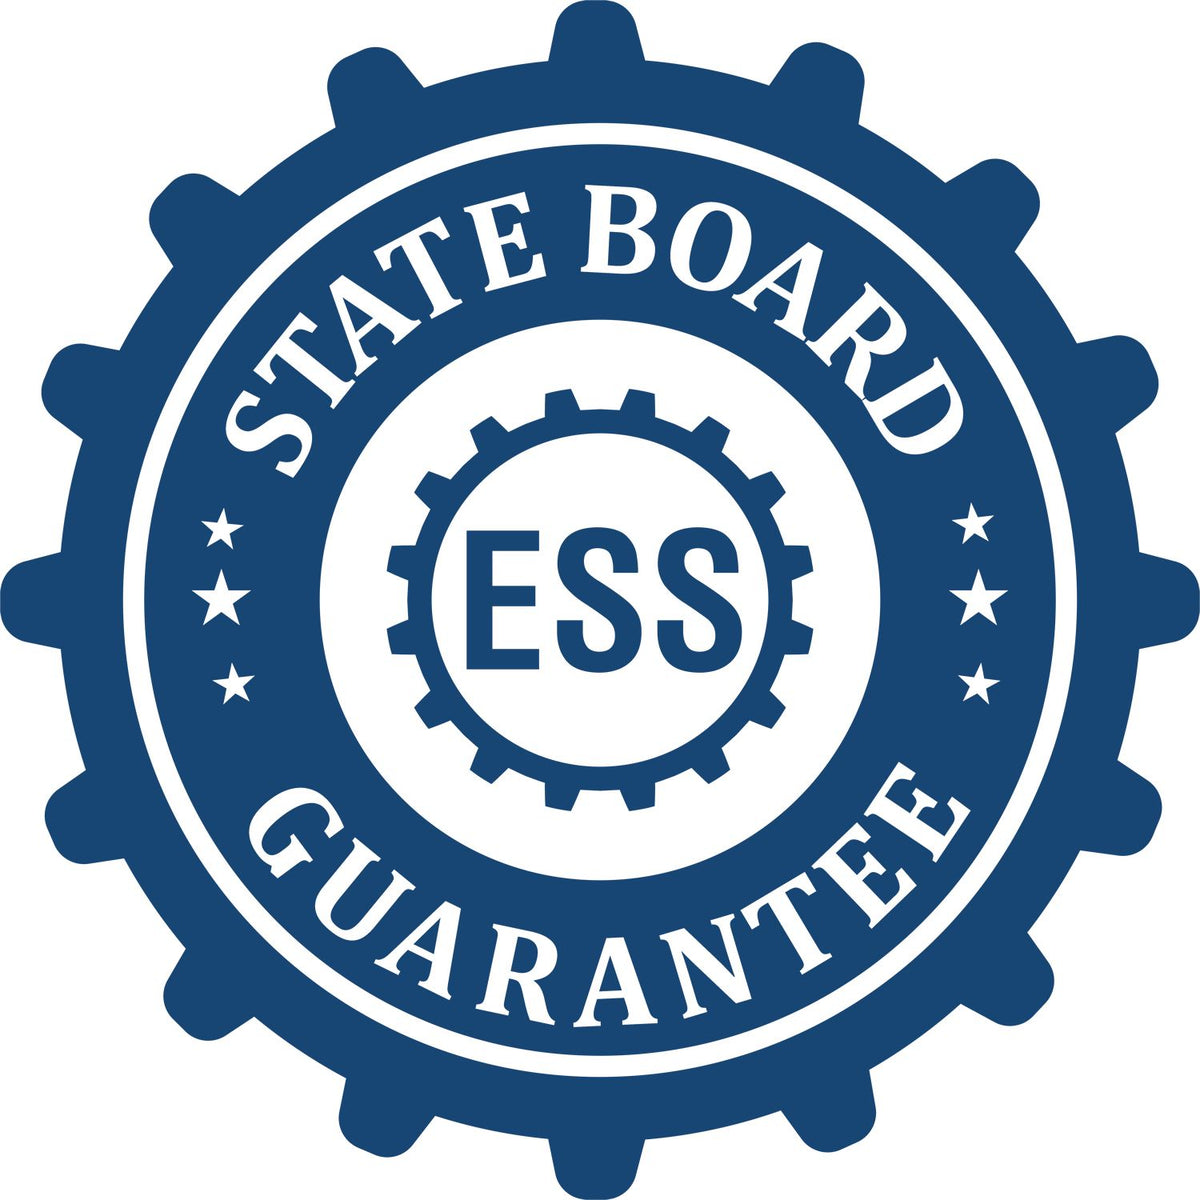 An emblem in a gear shape illustrating a state board guarantee for the Handheld Texas Professional Geologist Embosser